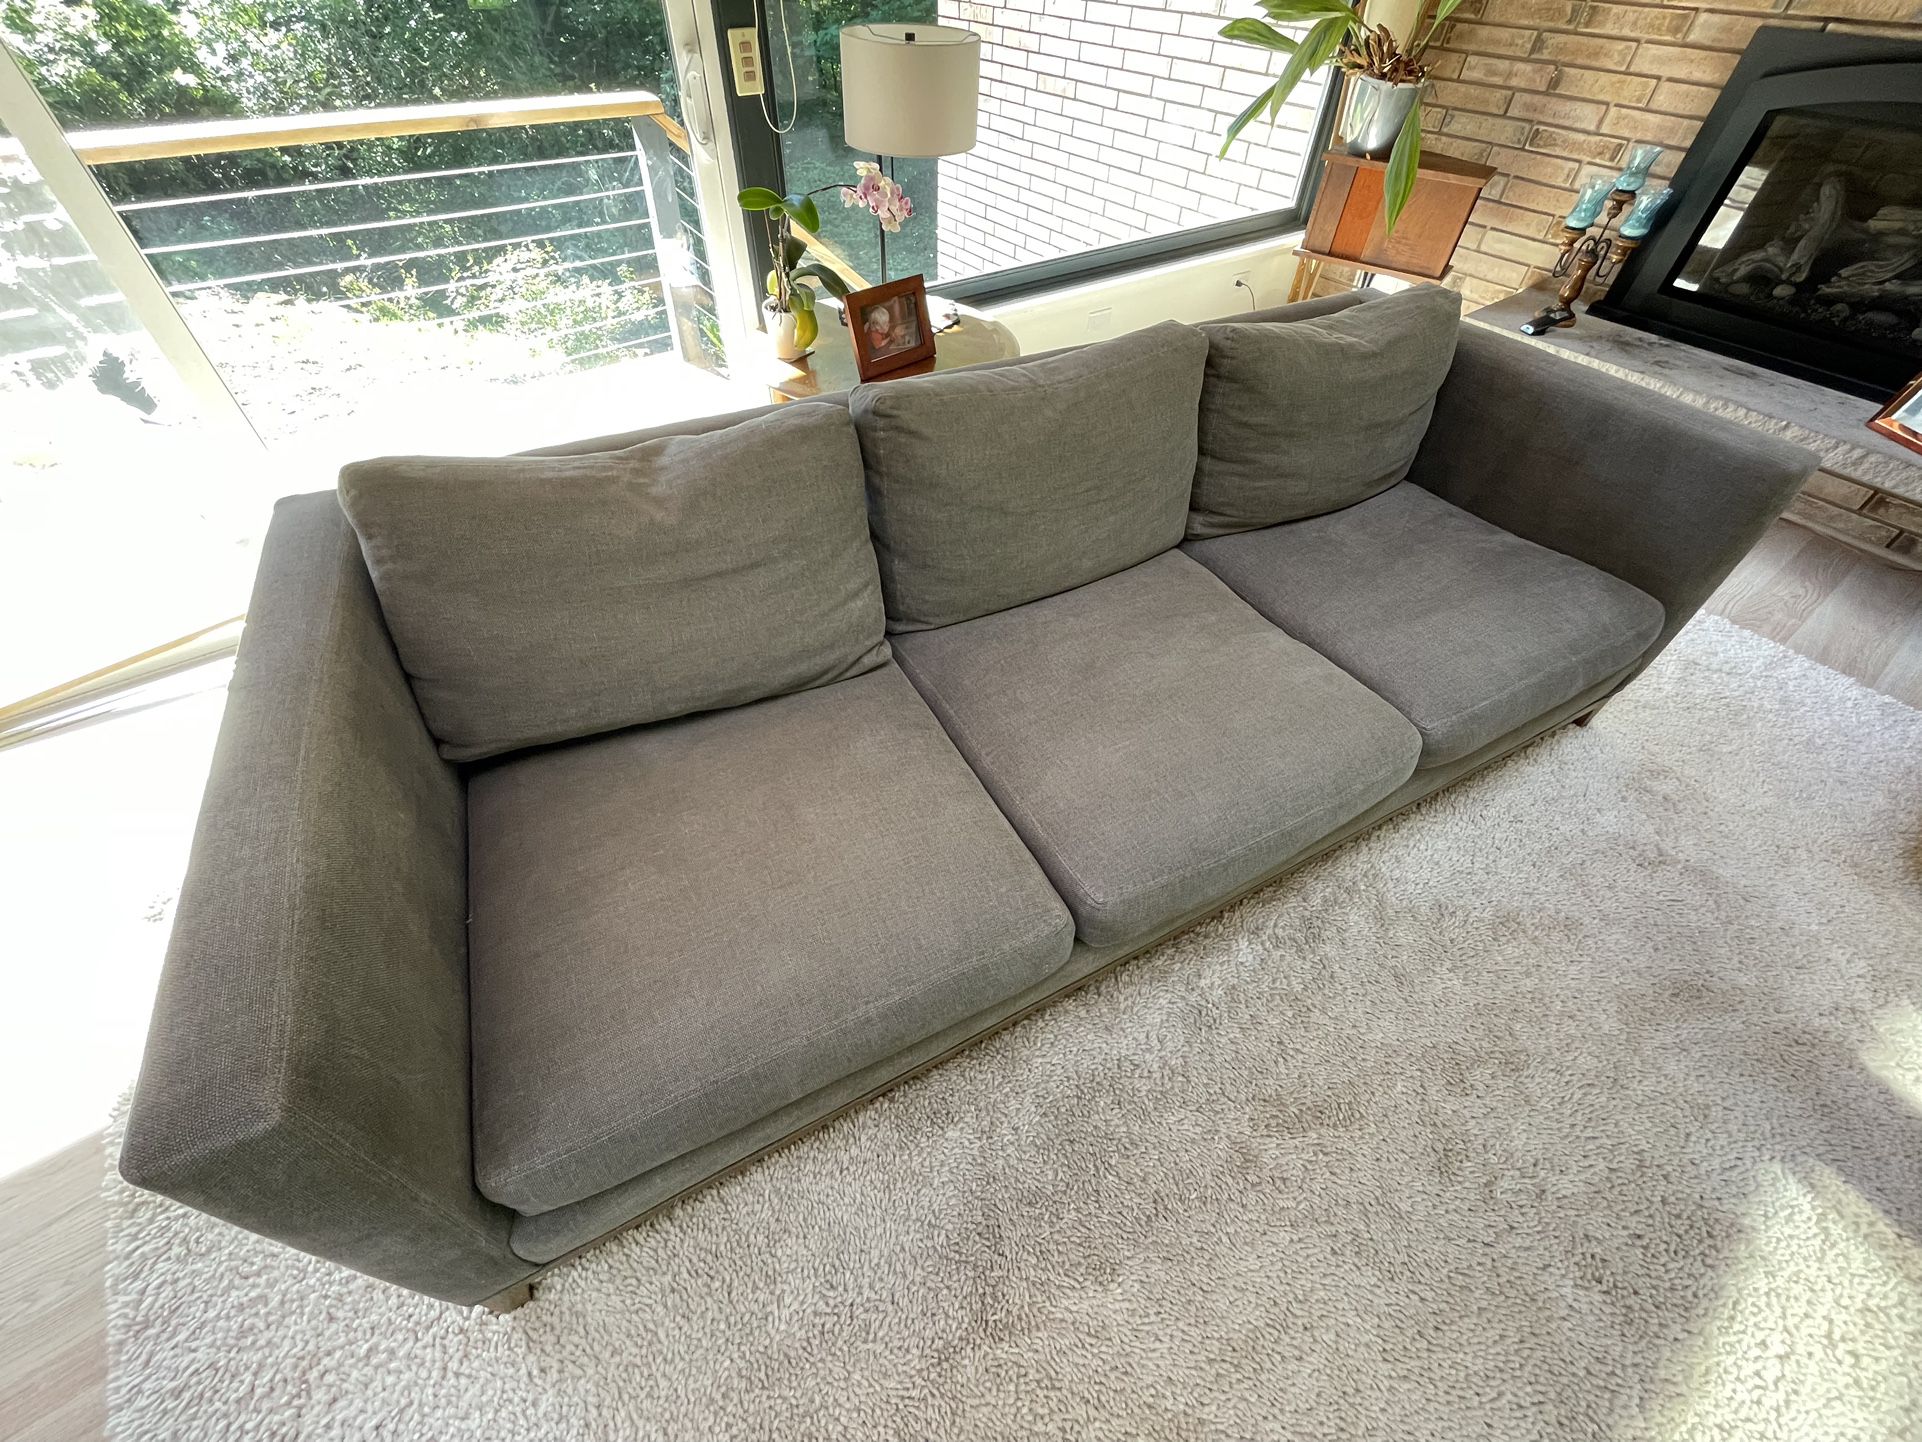 Gray Crate and Barrel Couch